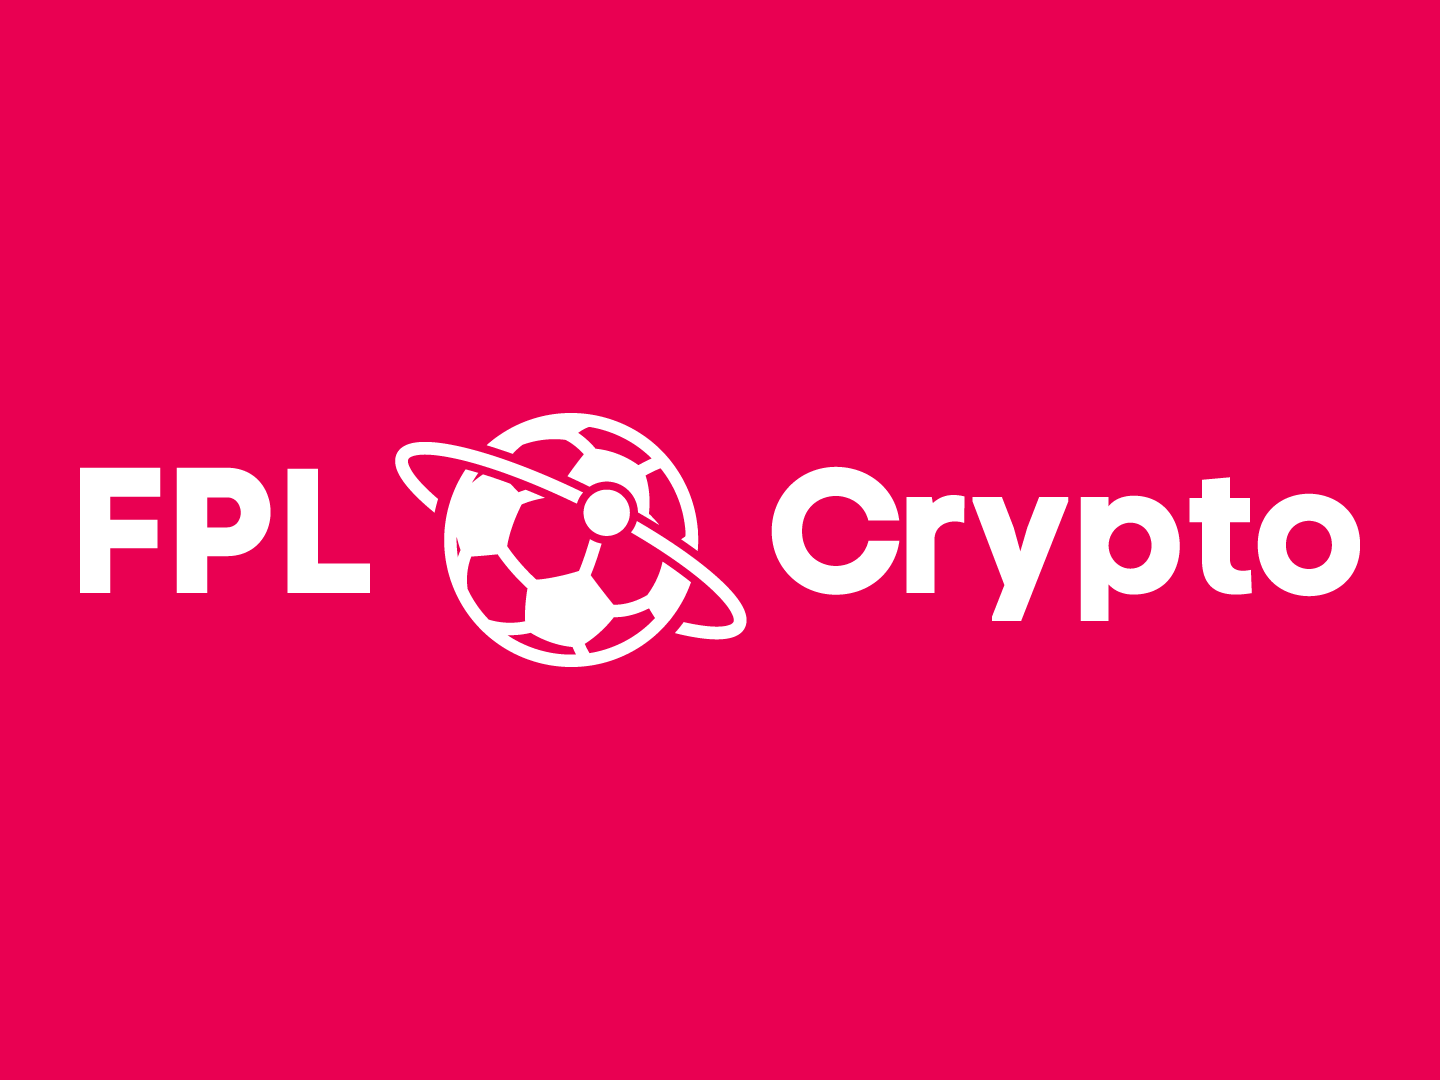 FPL Crypto by Chris Hood on Dribbble.